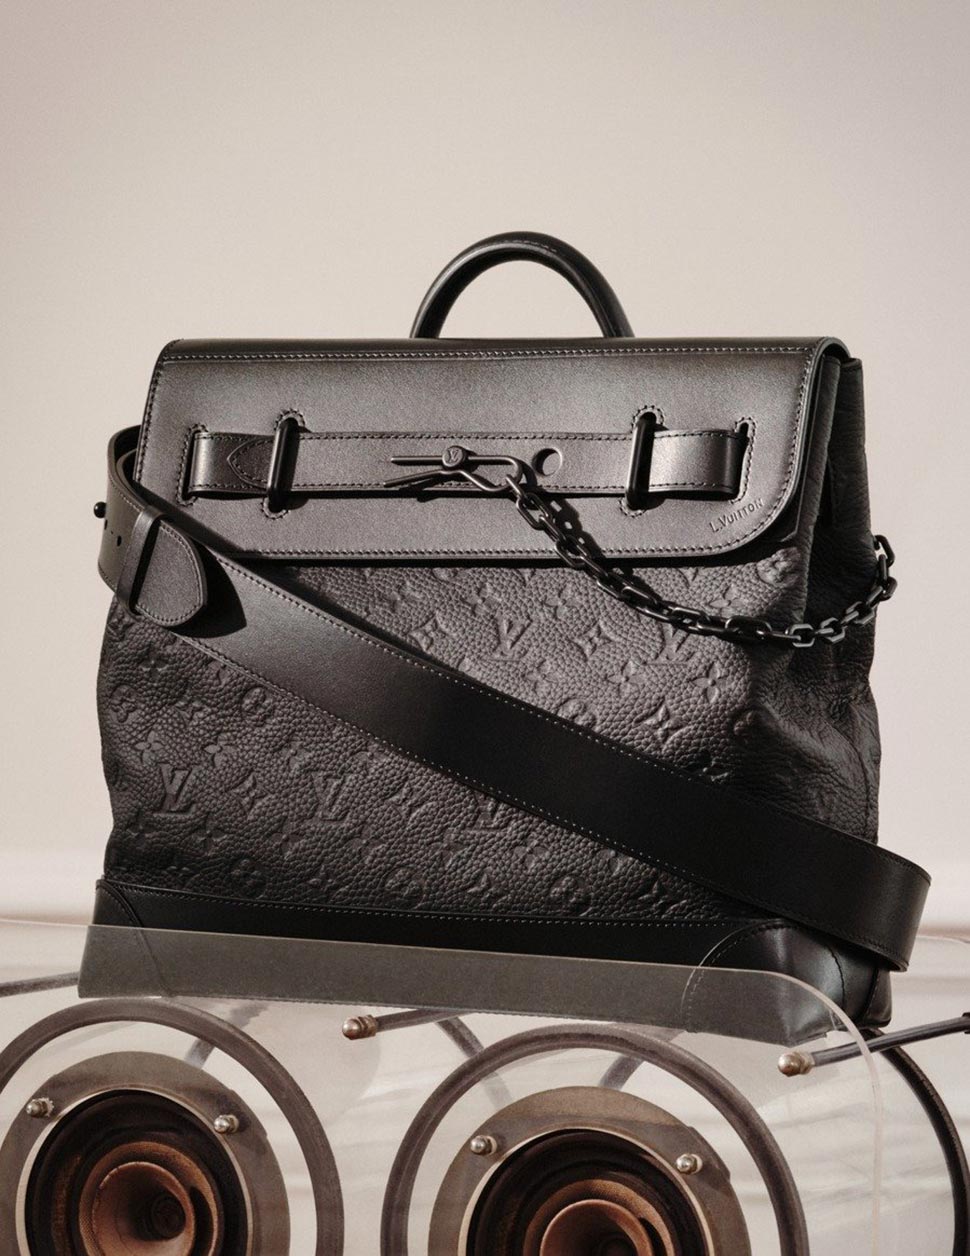 Louis Vuitton launches latest collection: “New Formals”